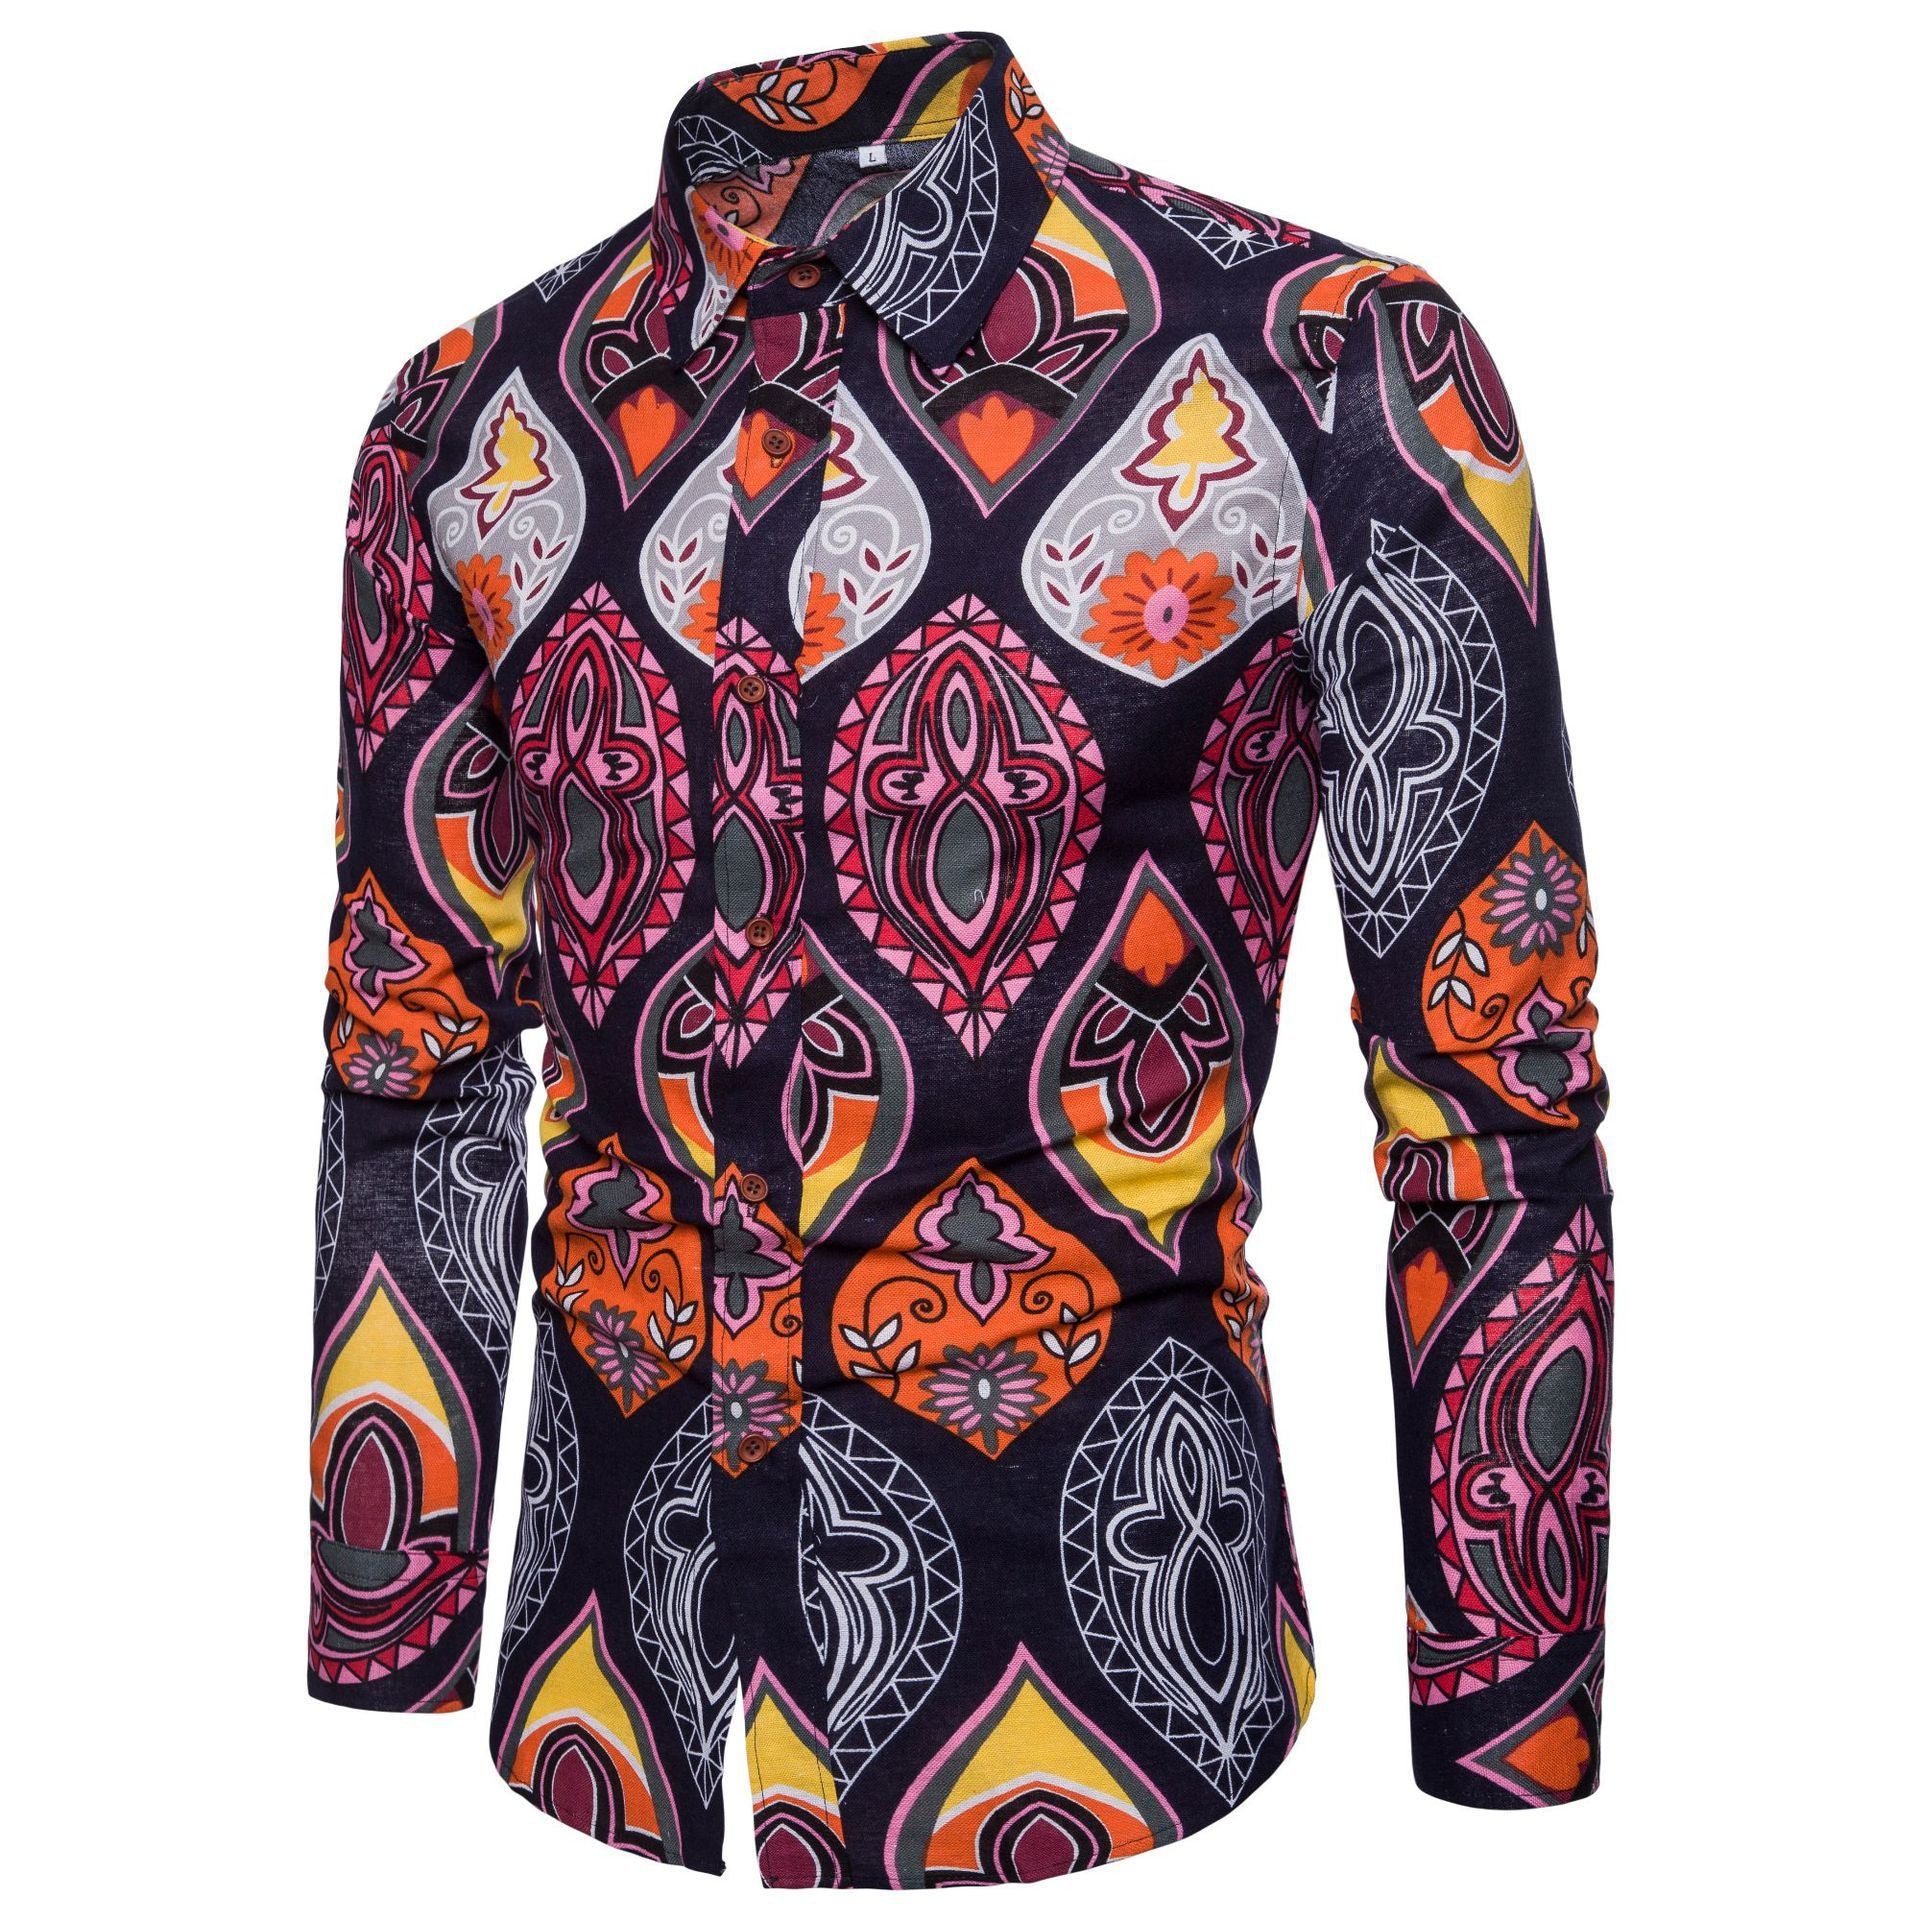 Tropical Escape: Men's Long Sleeve Hawaiian Shirt. Vacation-ready style and comfort in vibrant tropical designs.